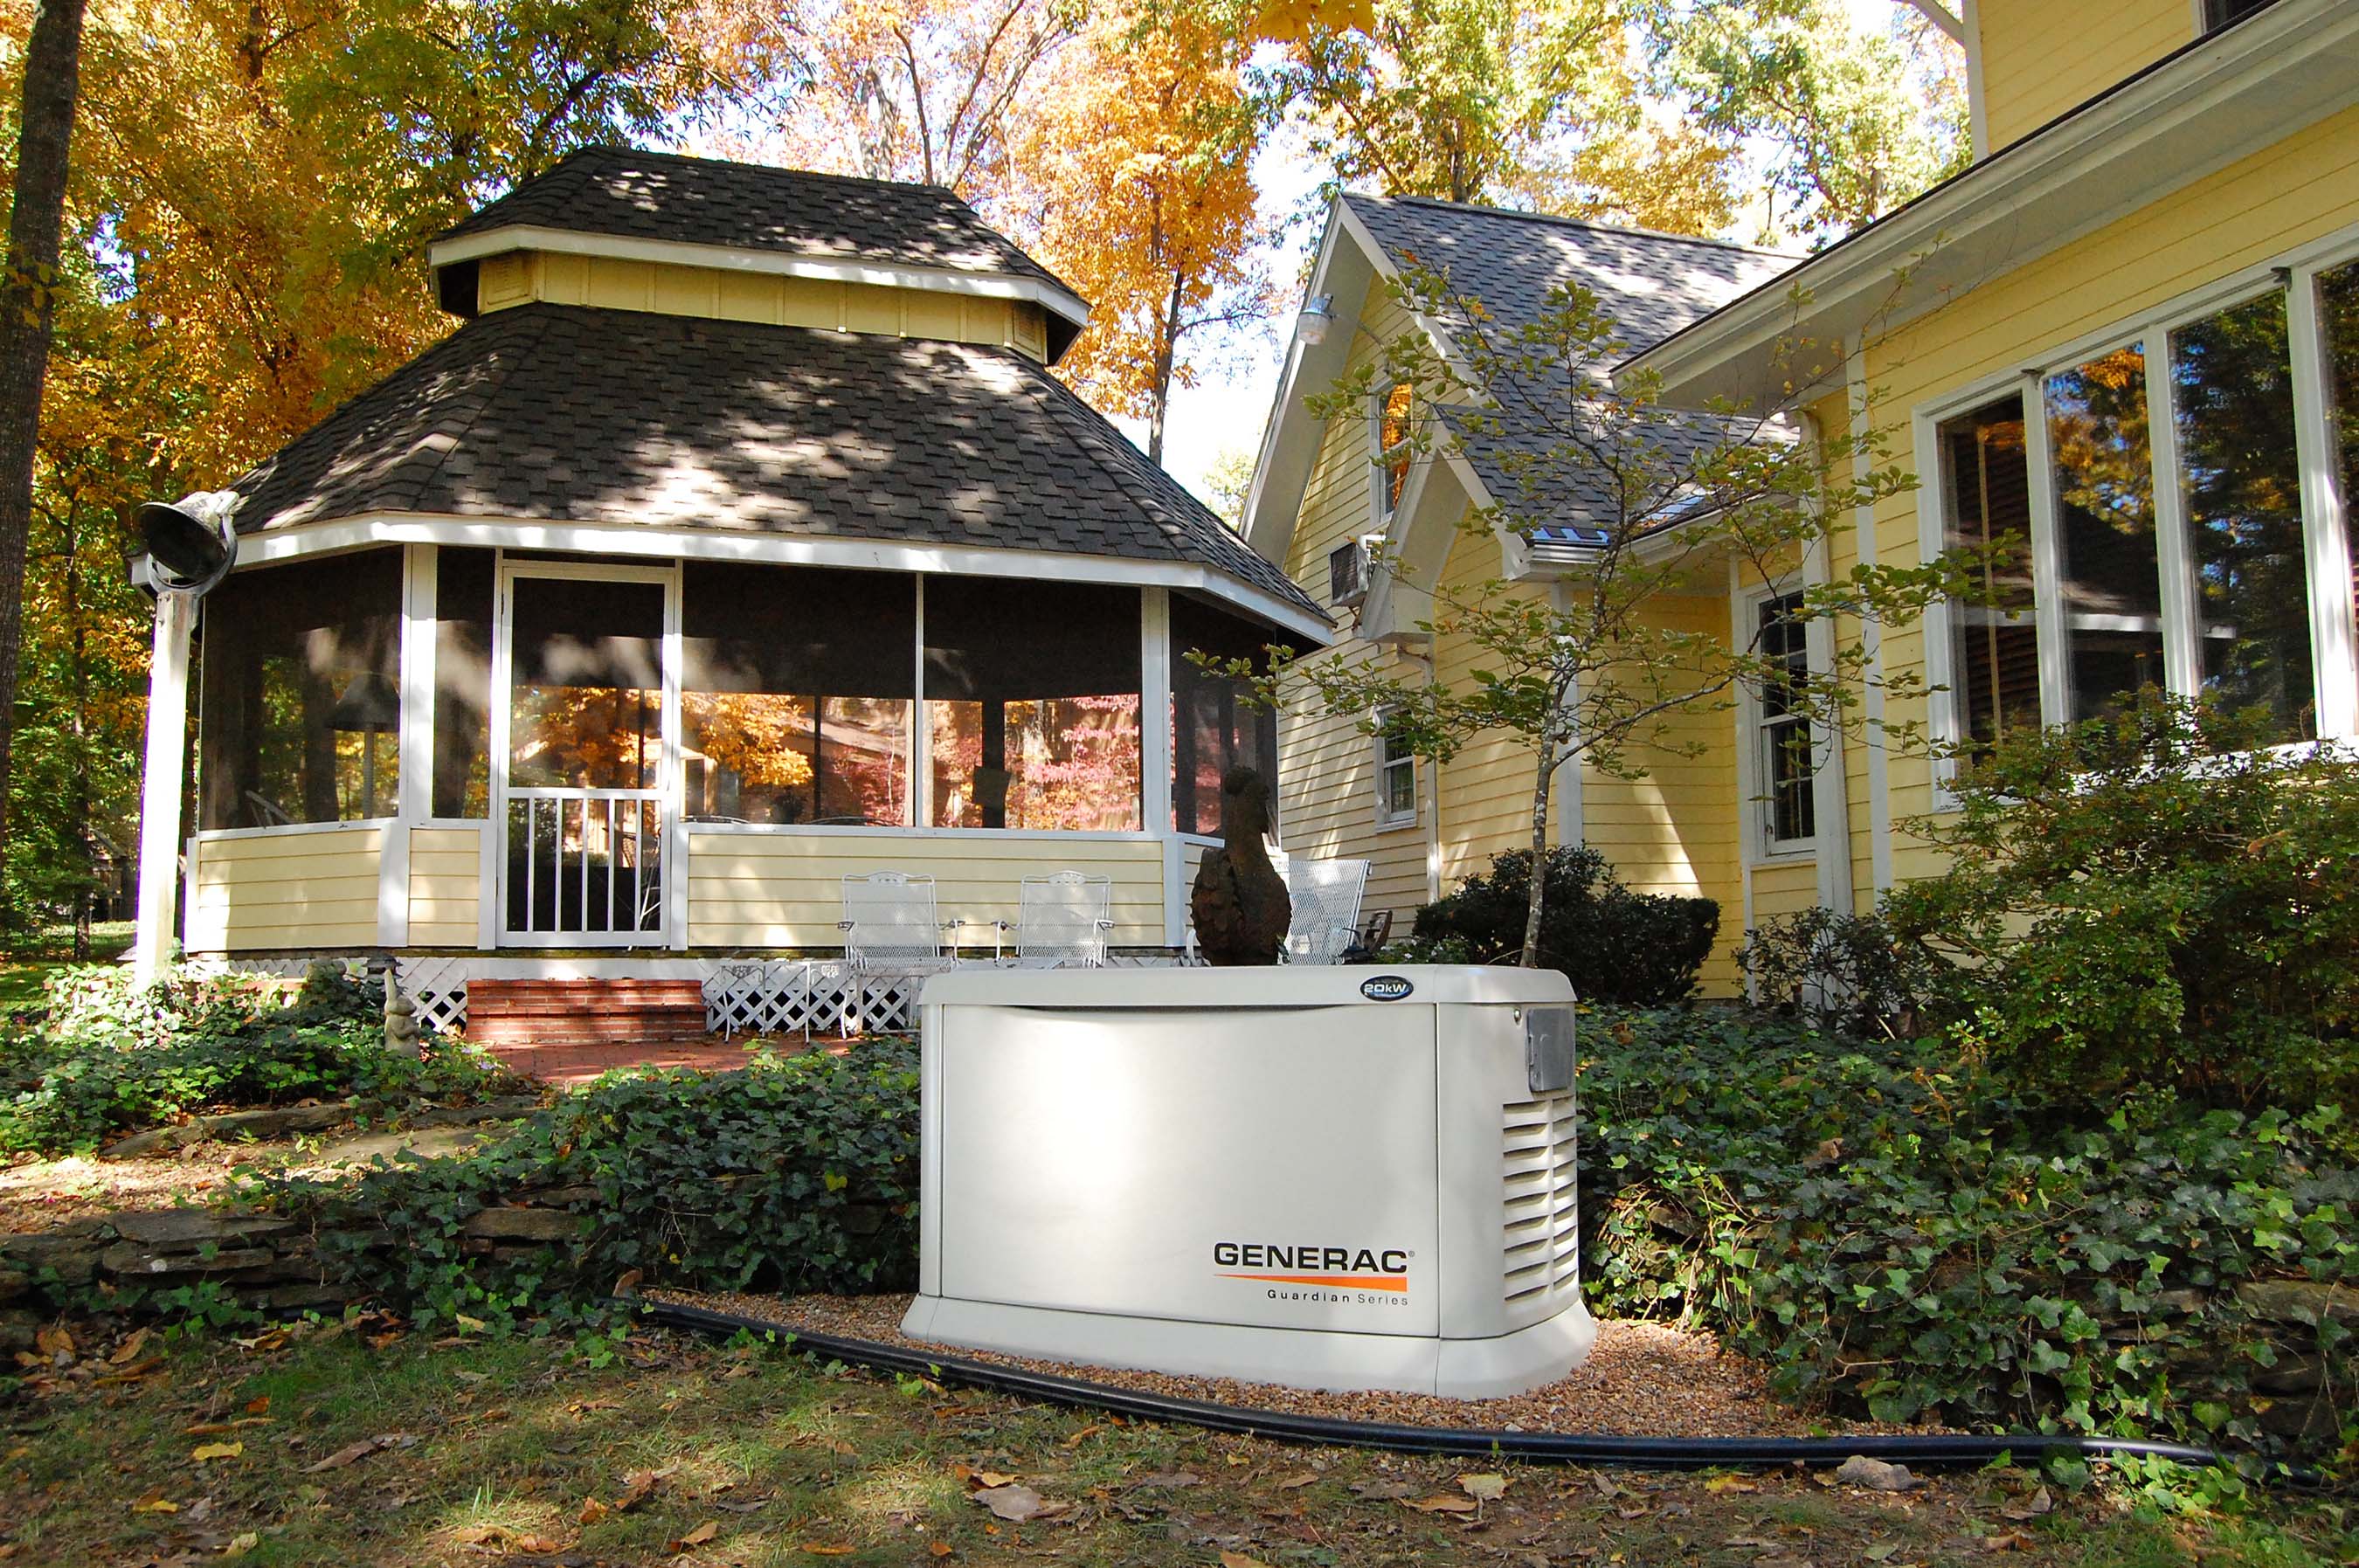 Outages are widespread, inconvenient and can yield a costly impact on your home. A home backup generator is an investment in your home and family's security.